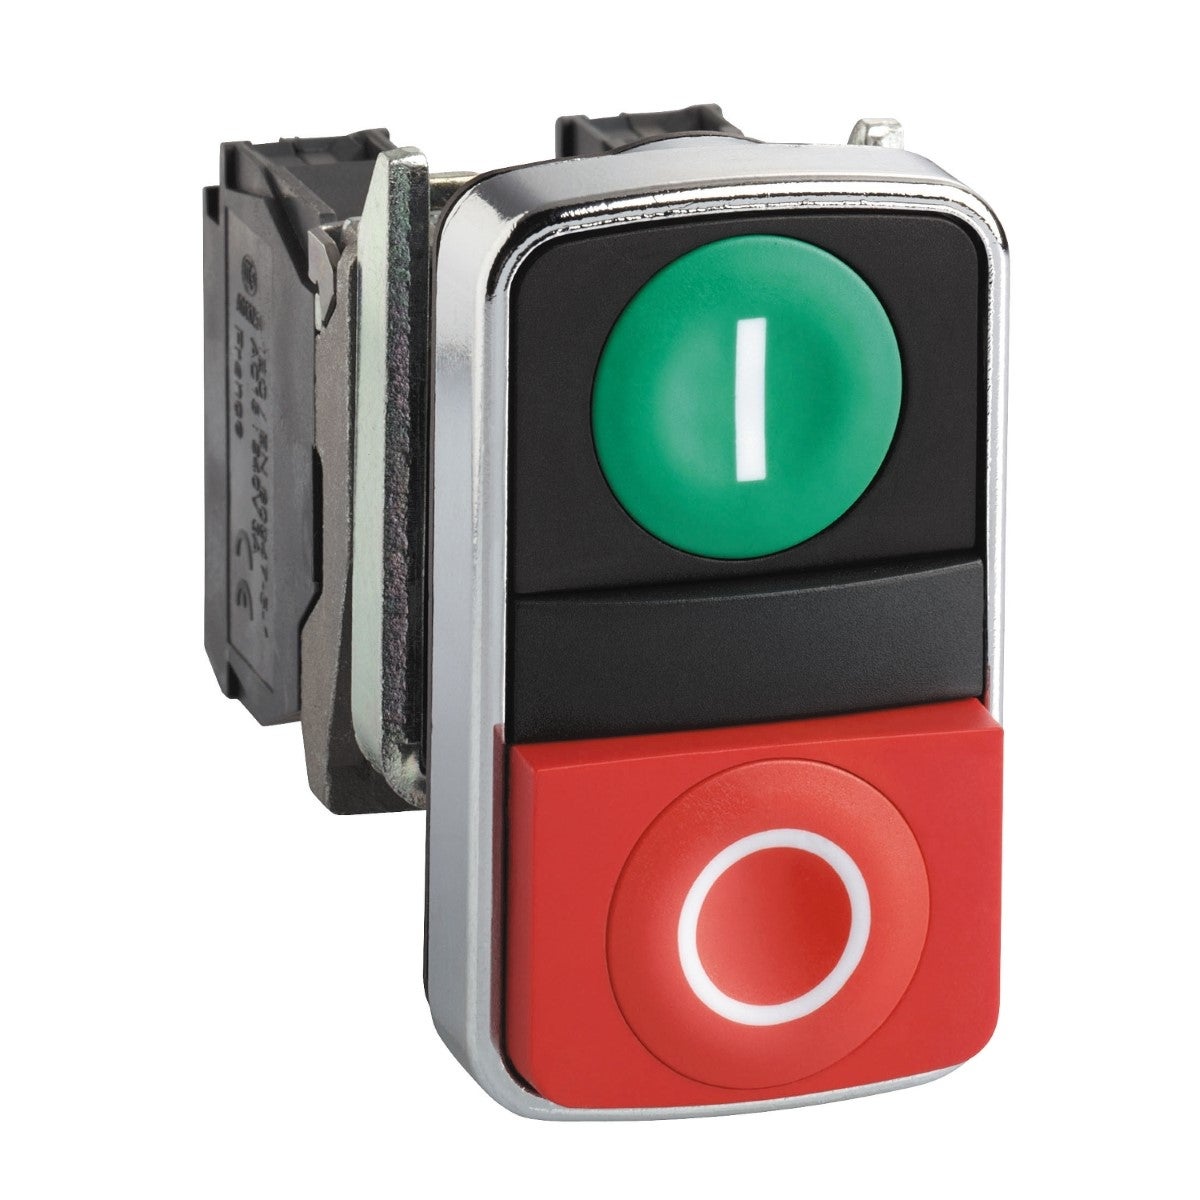 Double-headed push button, metal, Ã˜22, 1 green flush marked I + 1 red projecting marked O, 1 NO + 1 NC